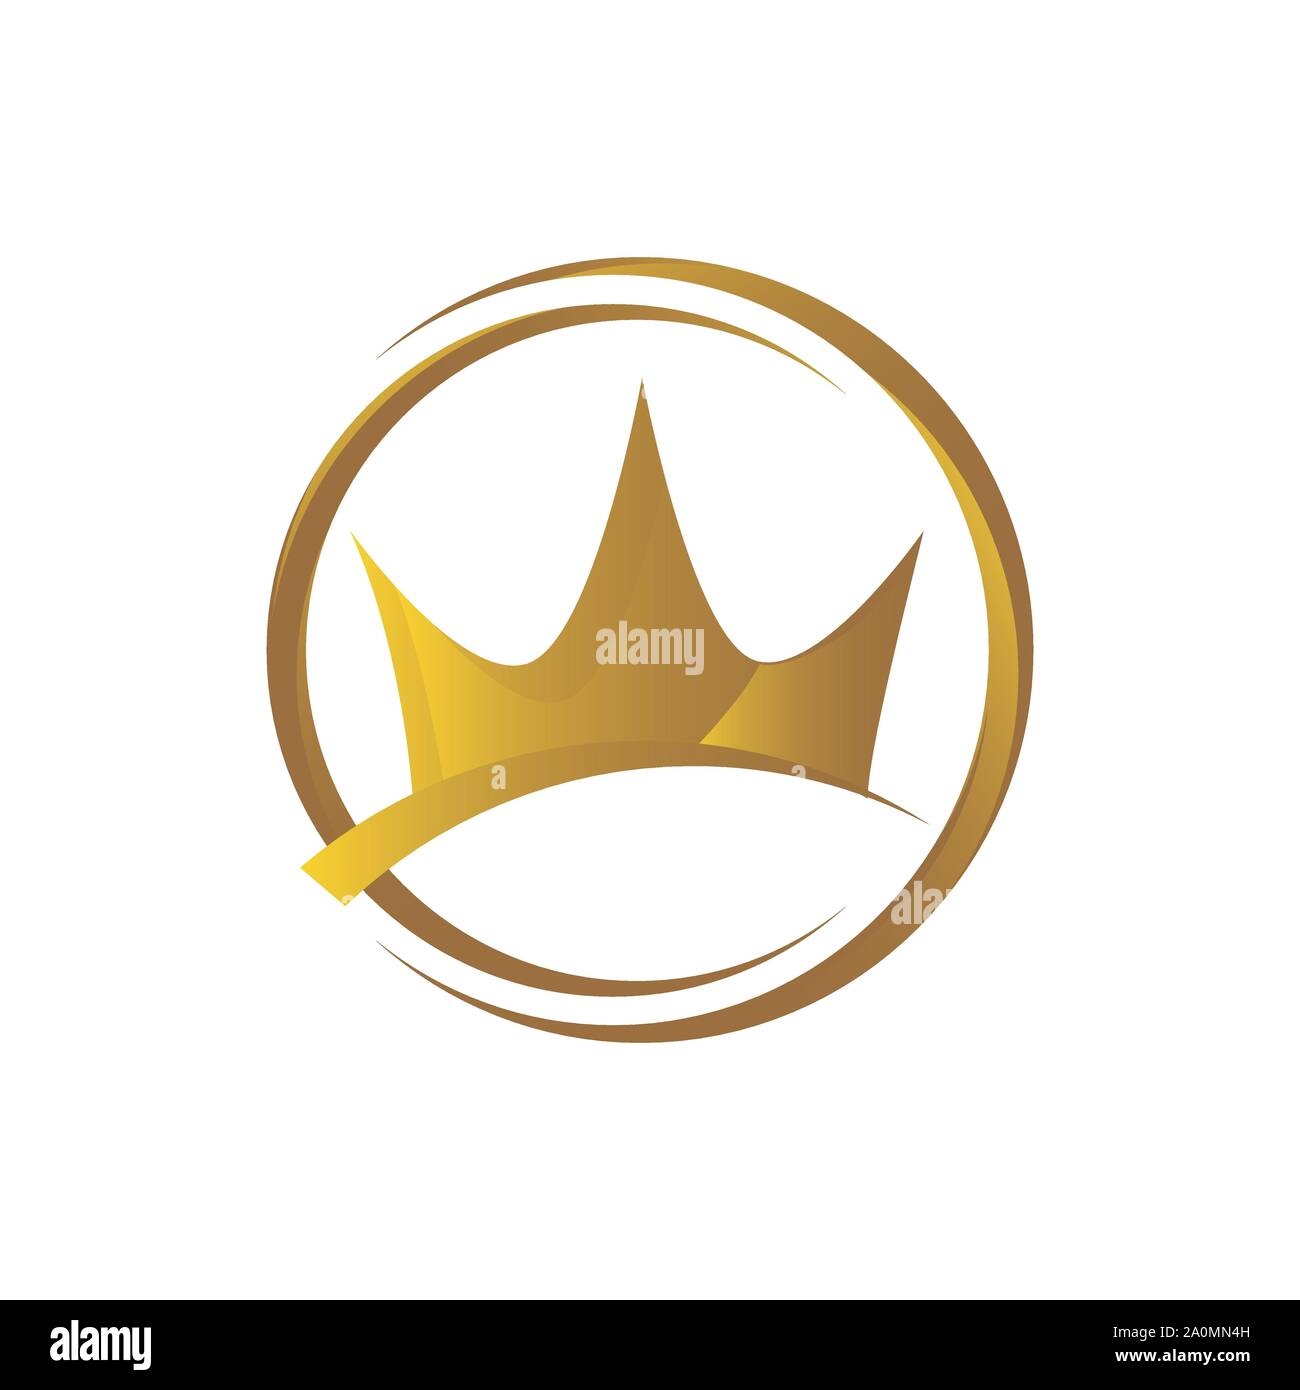 King Queen Vector Art, Icons, and Graphics for Free Download